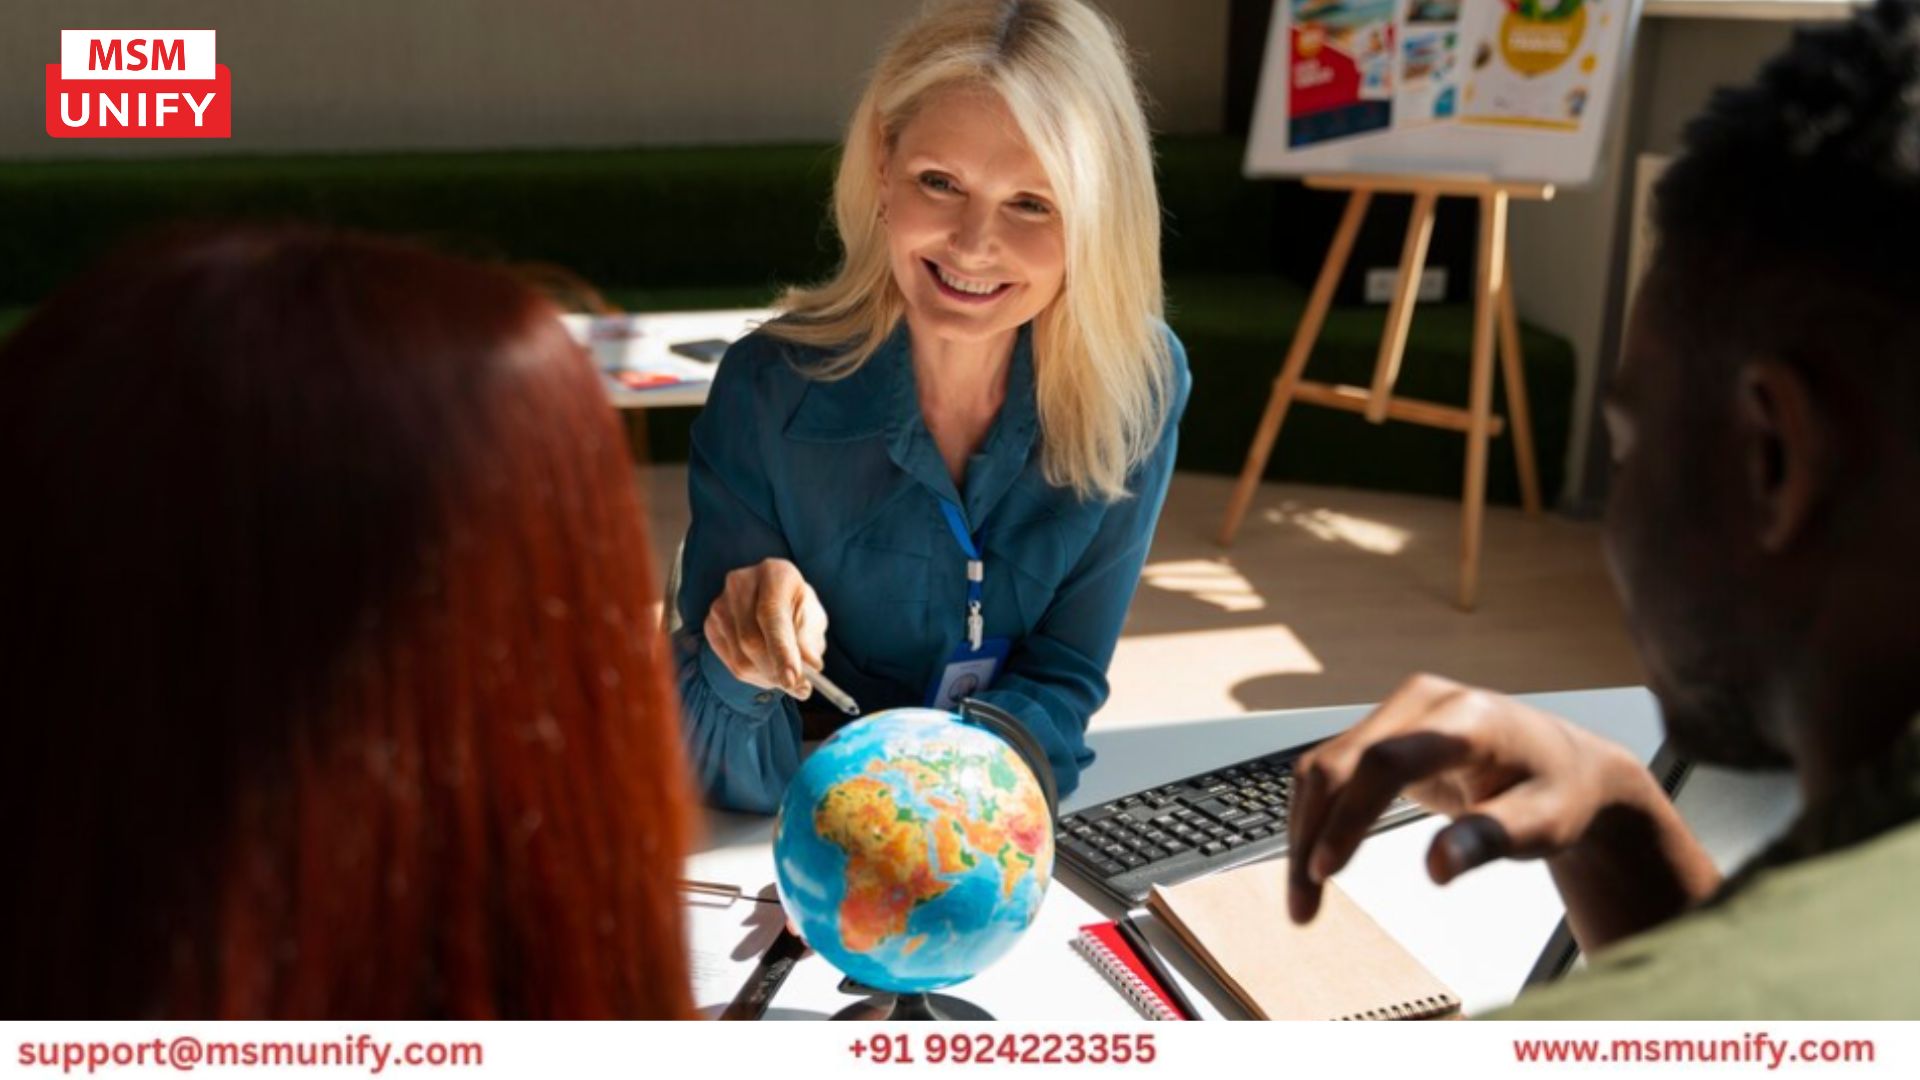 Explore boundless opportunities for international education with expert <a href="https://www.msmunify.com/study-abroad/">study-abroad consultants</a>. Our comprehensive guidance ensures a seamless and enriching experience. Start your academic adventure now!
